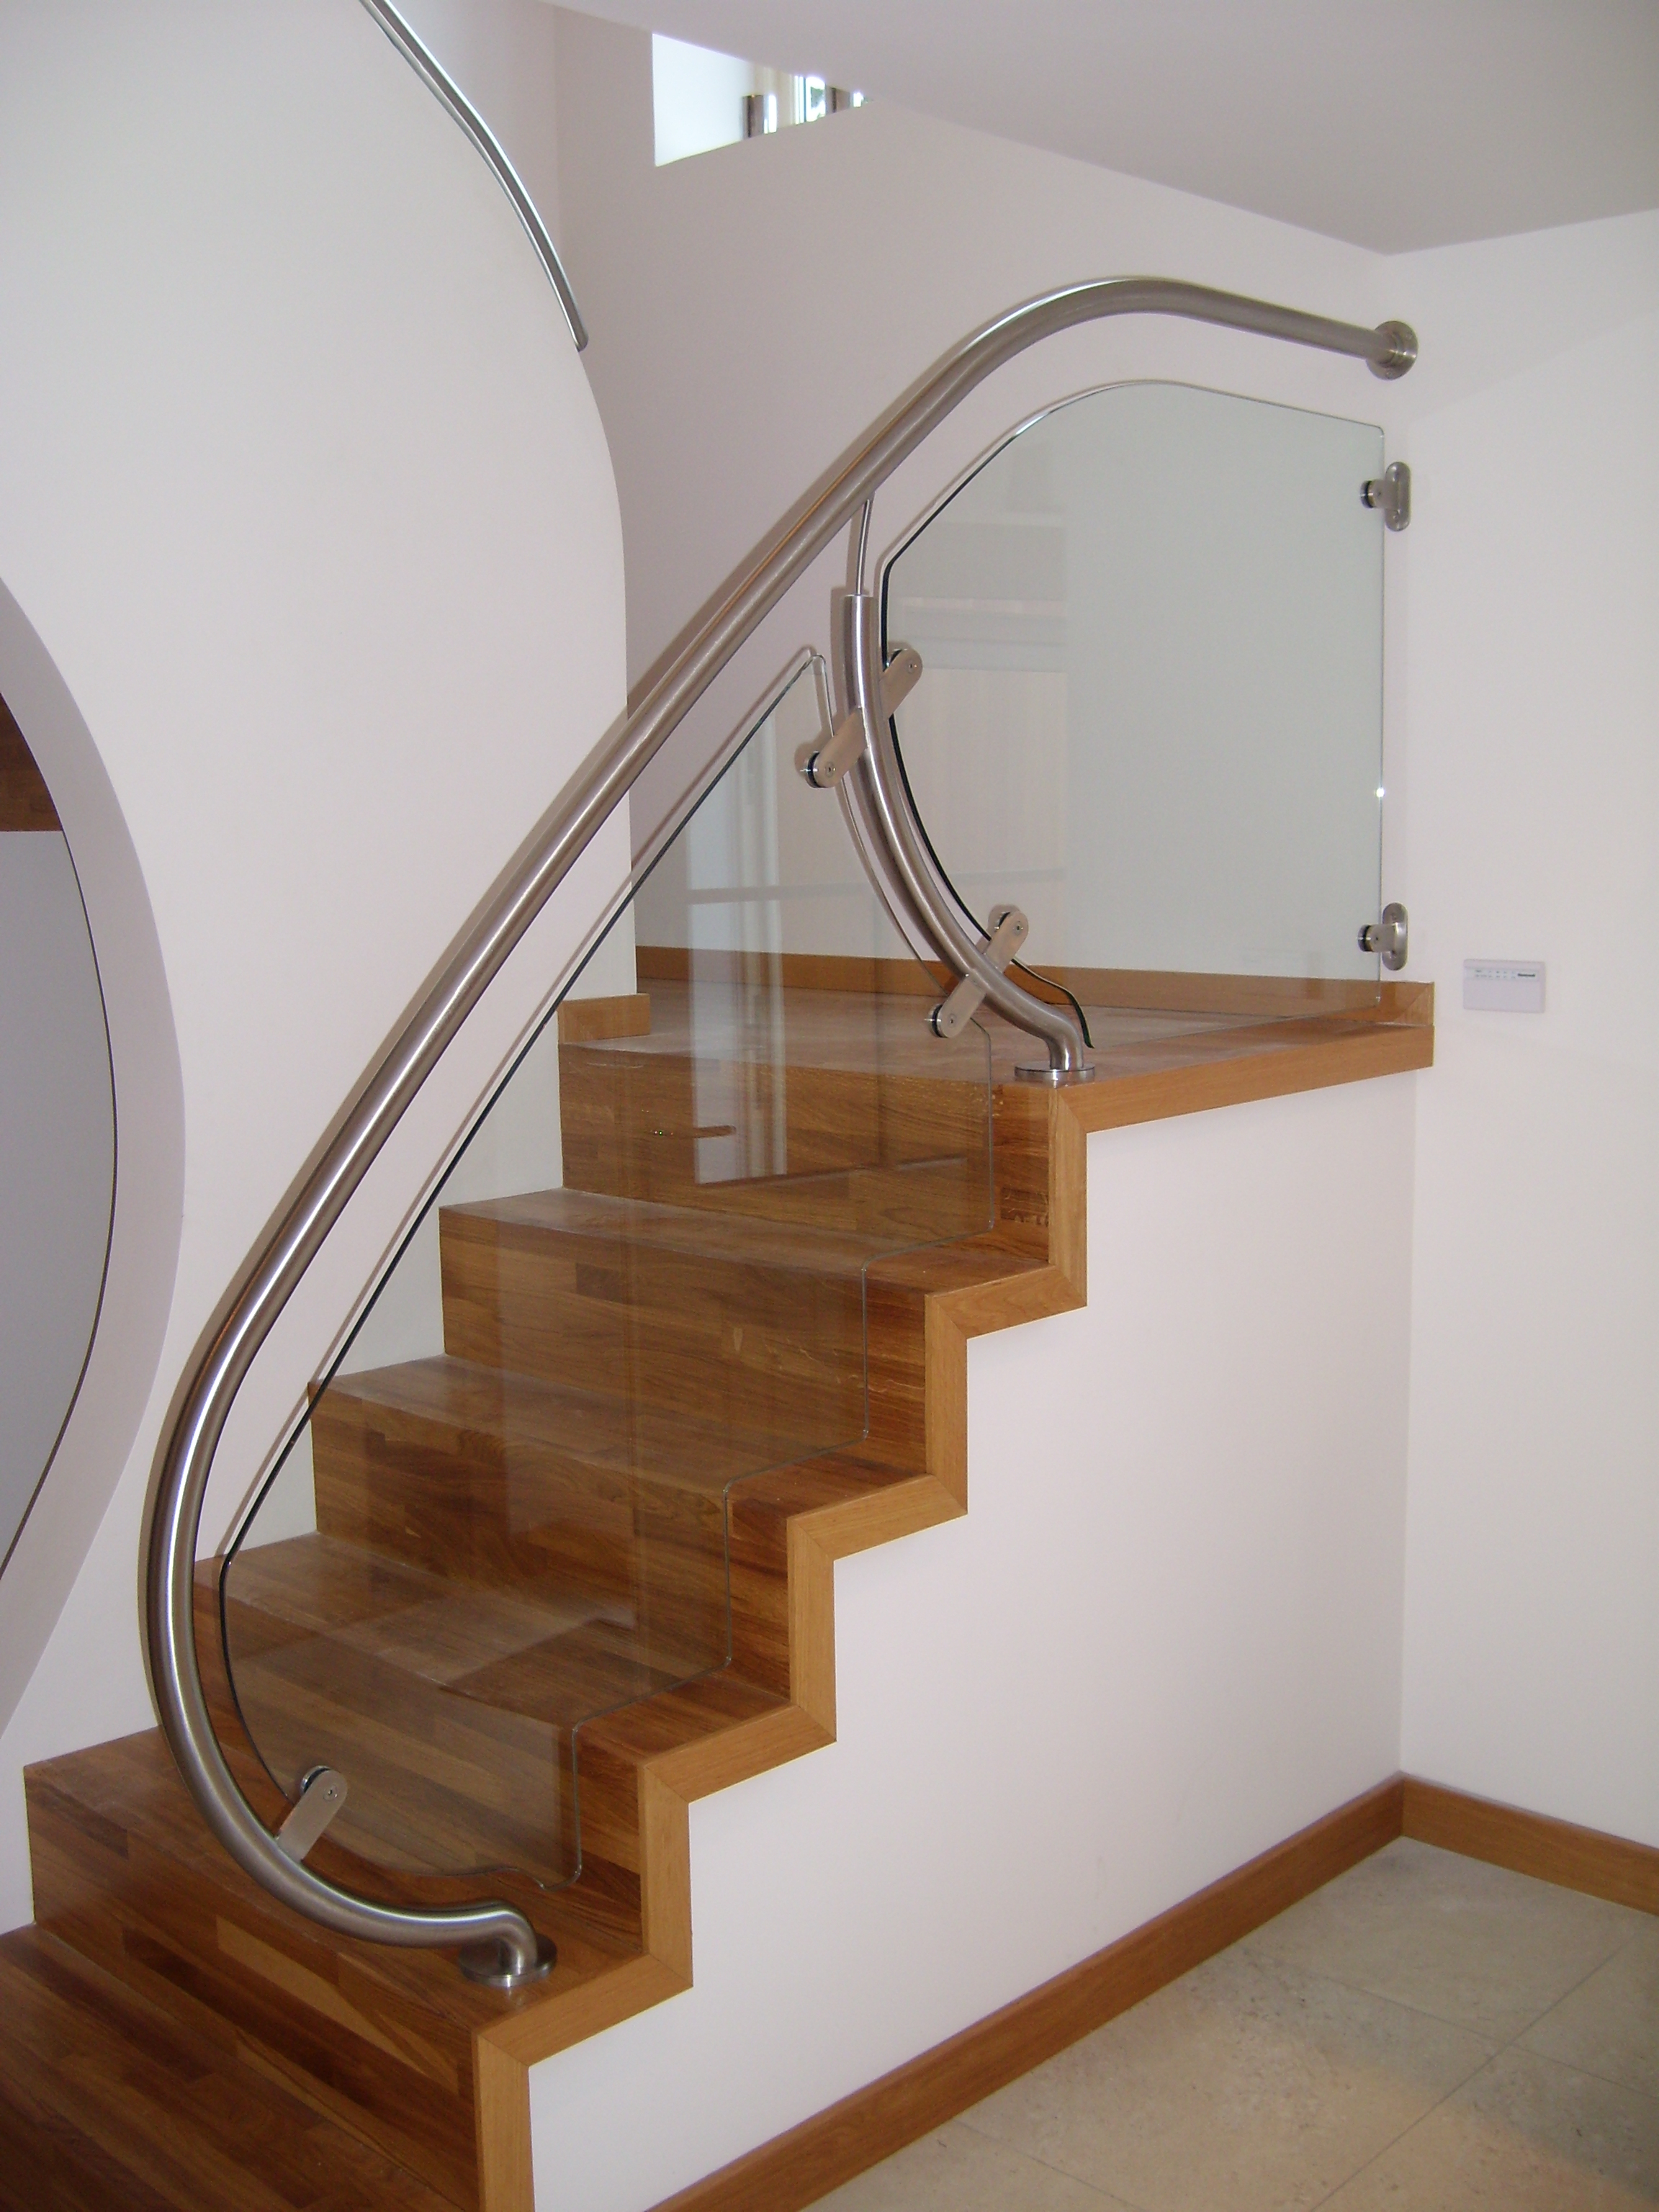 Designer Staircases, Modern Staircases - London, West Midlands ...